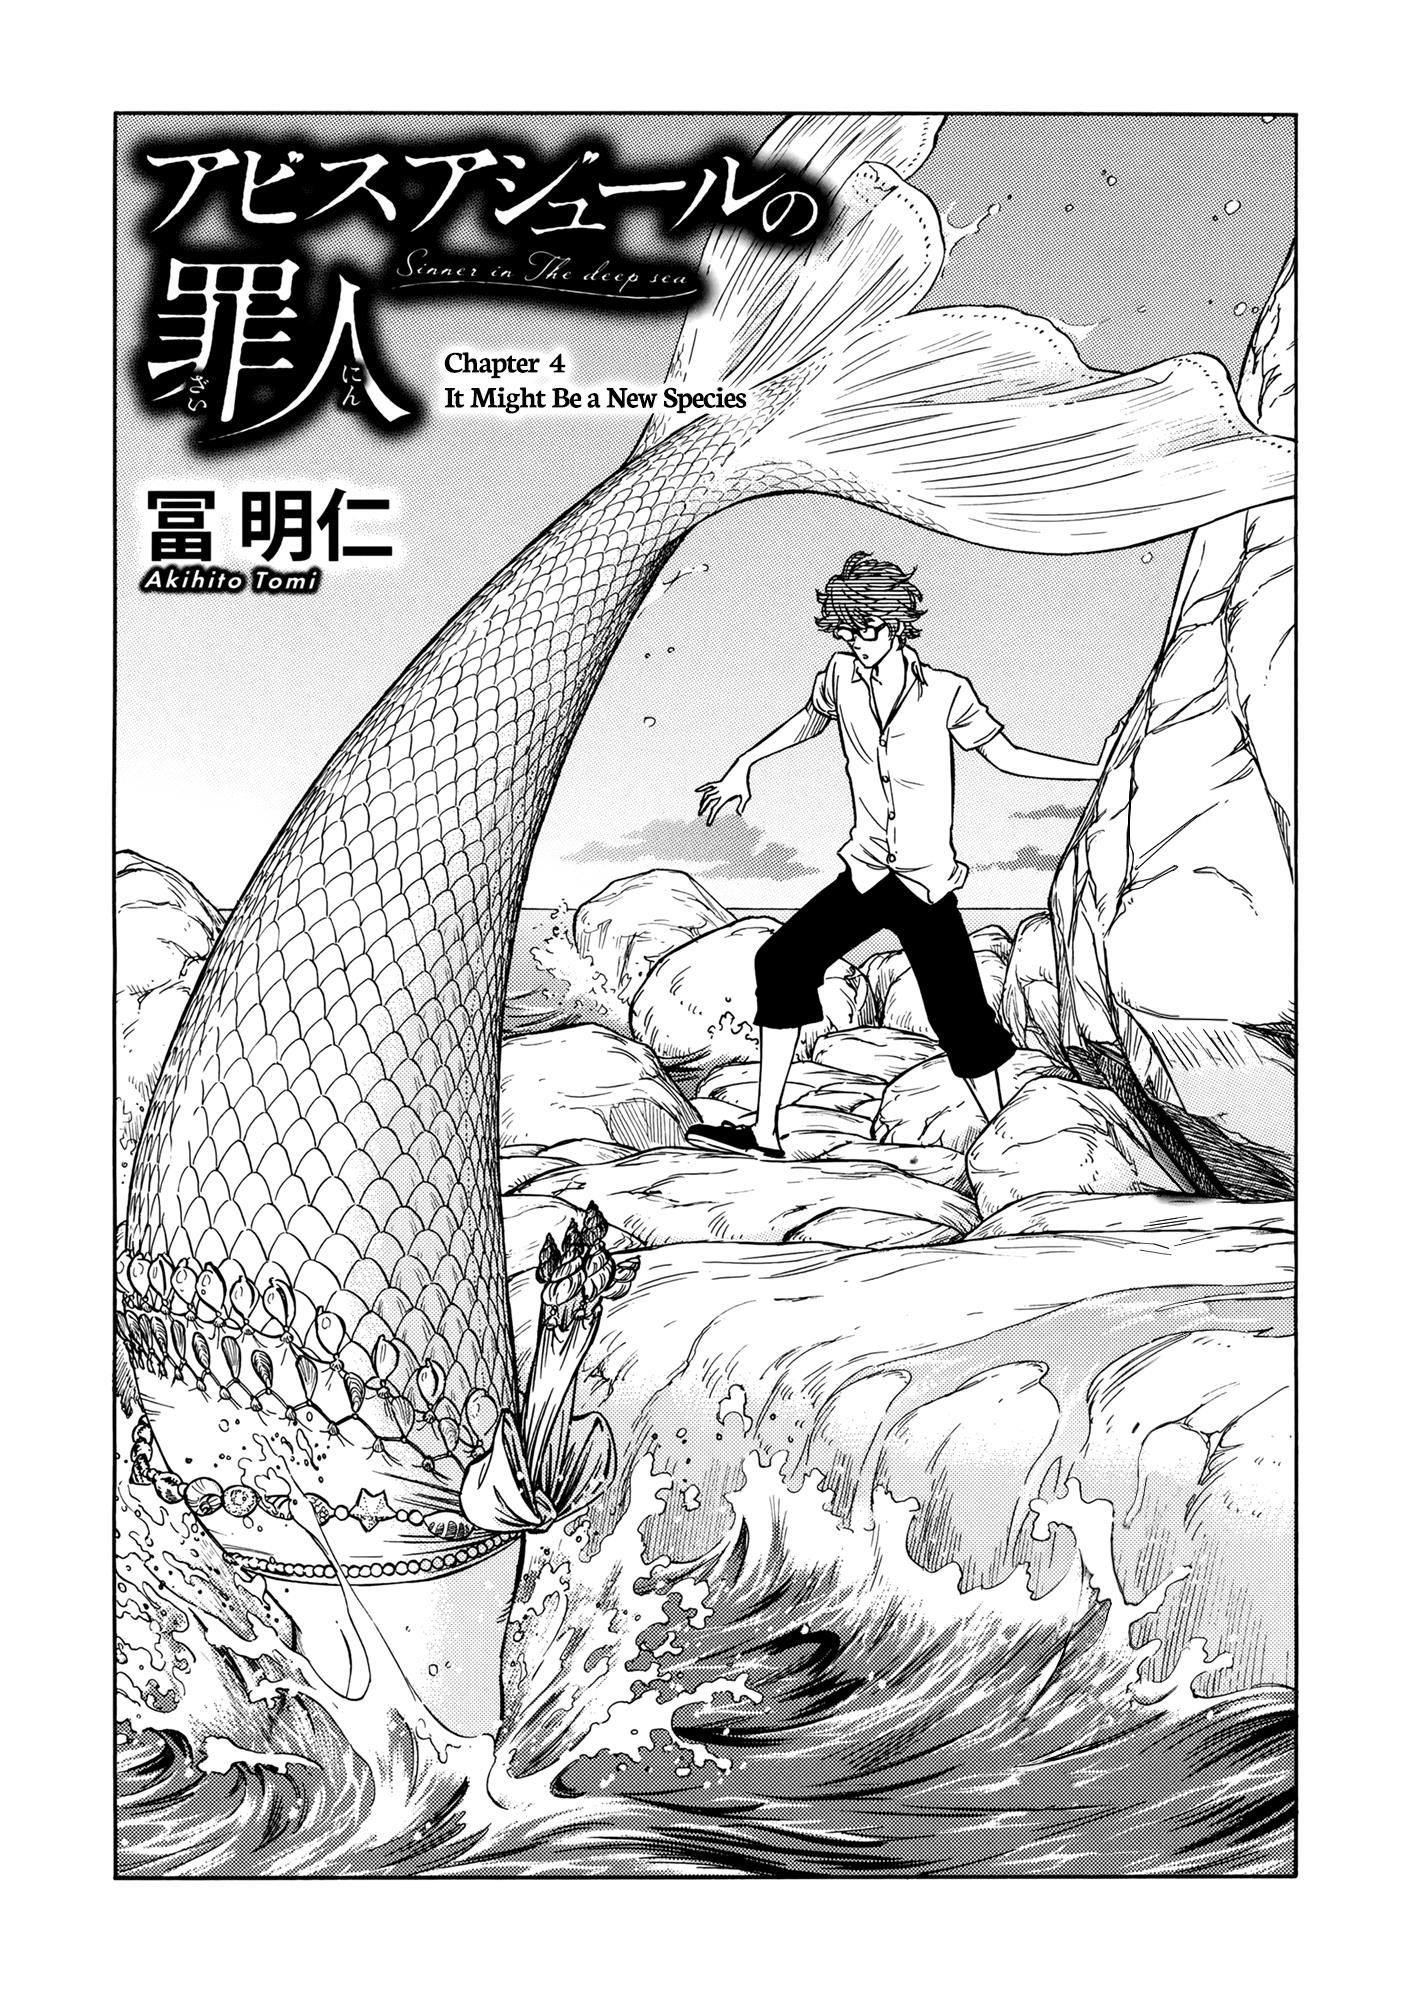 Abyss Azure No Zainin Vol.1 Chapter 4: It Might Be A New Species - Picture 1